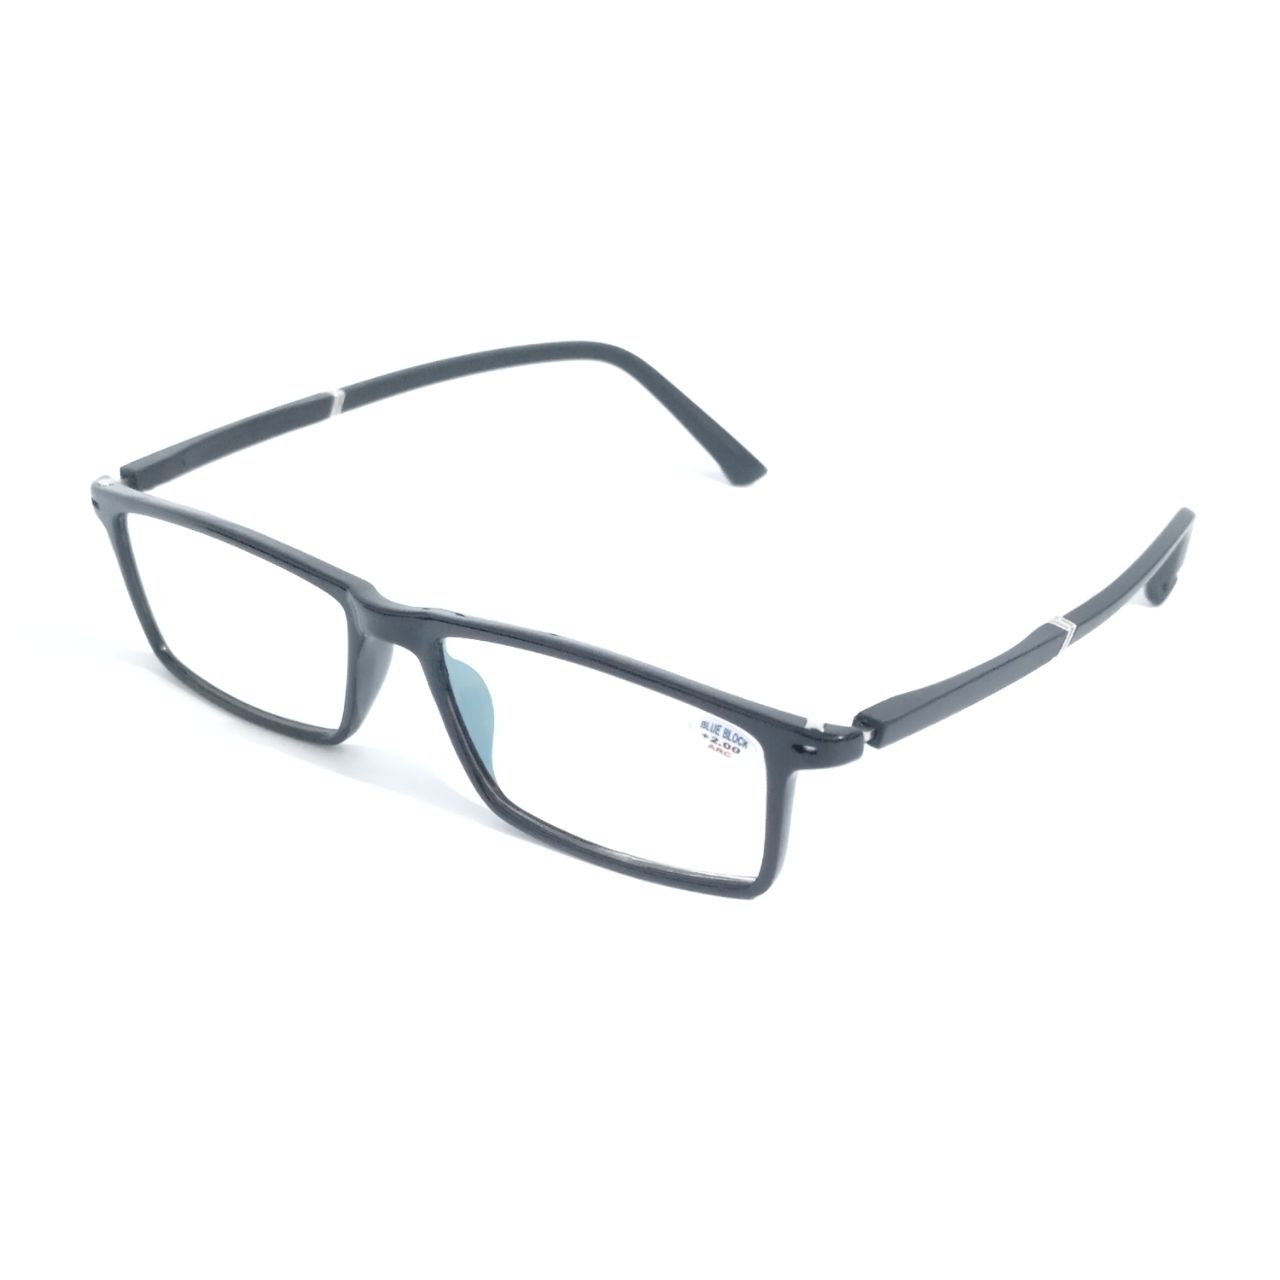 Plus Two +2.00 Reading Power Anti Glare Computer Reading Glassee